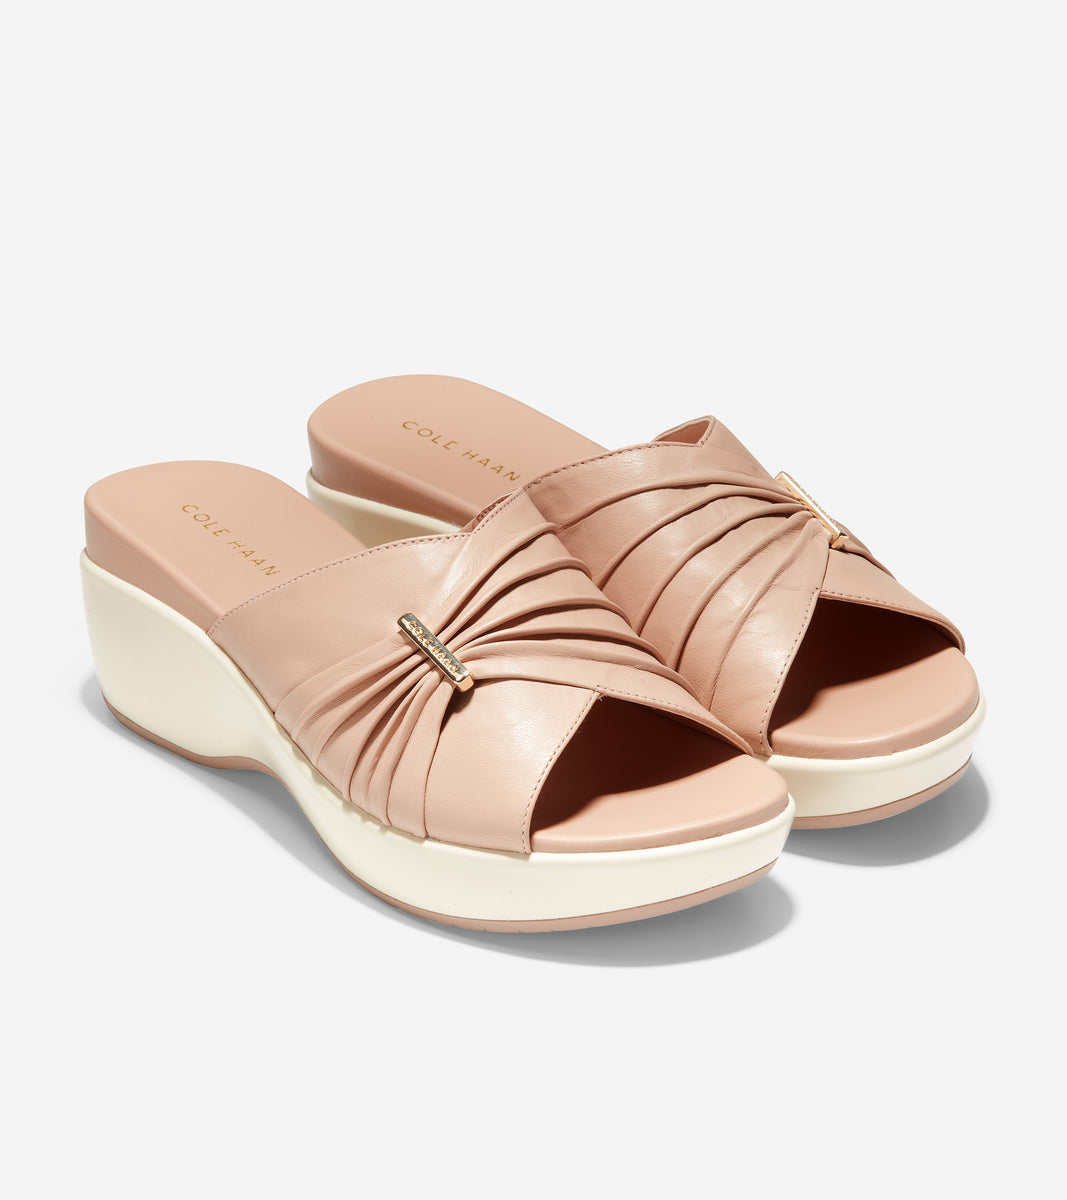 ColeHaan-Aubree Ruched Slide Sandal-w17380-Mahogany Rose Leather